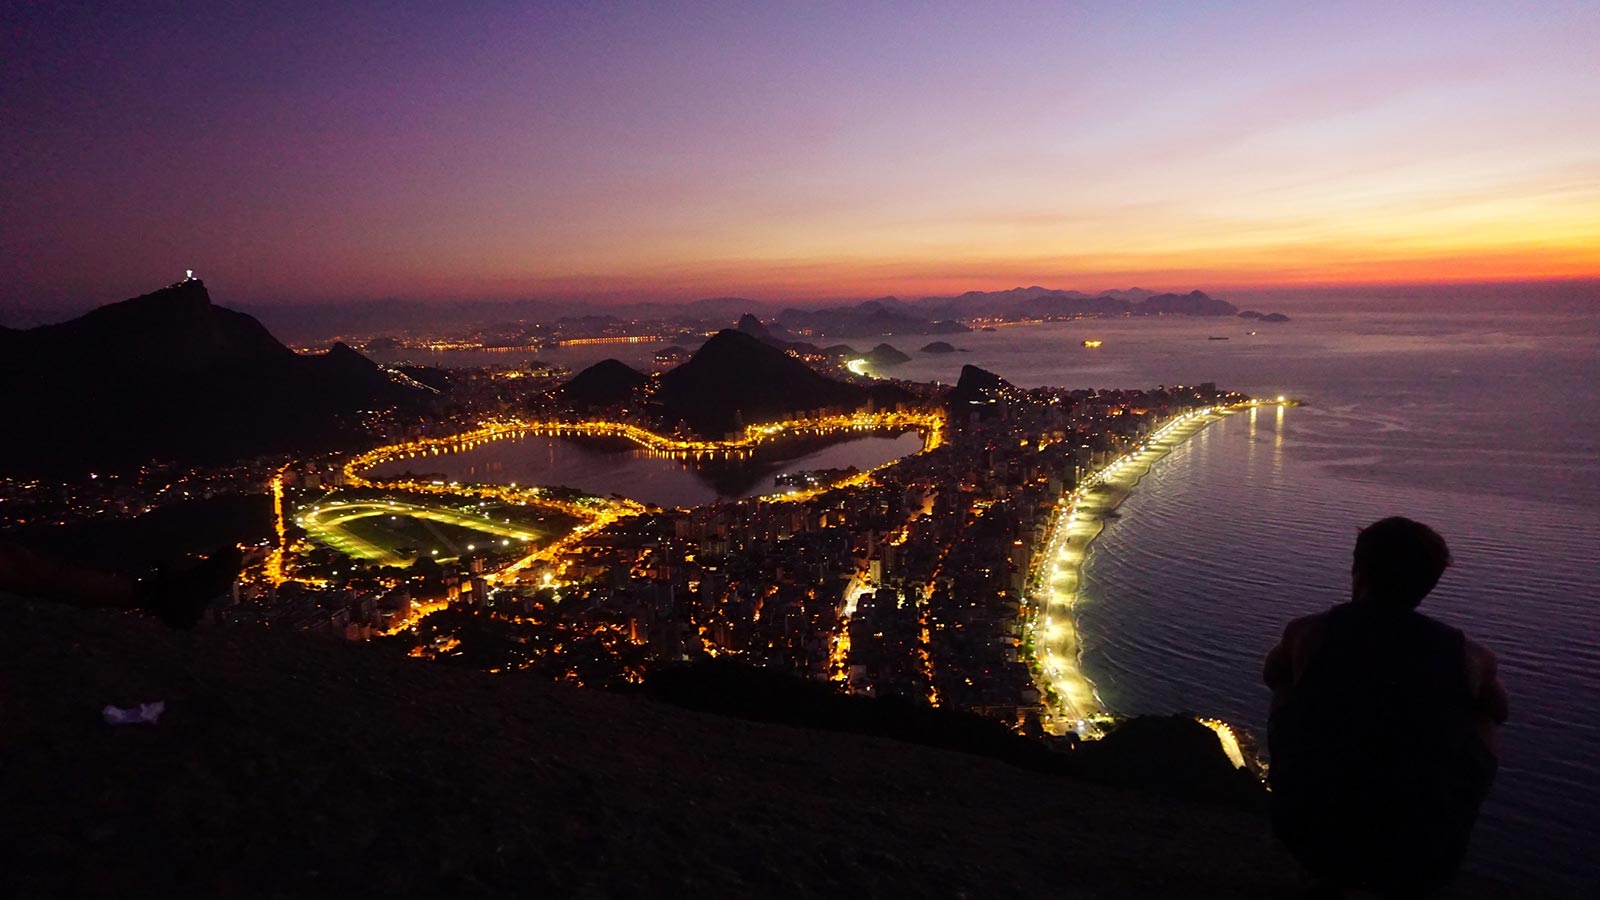 David Simpson enjoying the view at Two Brothers peak at night in Rio de Janeiro, Brazil. The best sunrise hike in the world